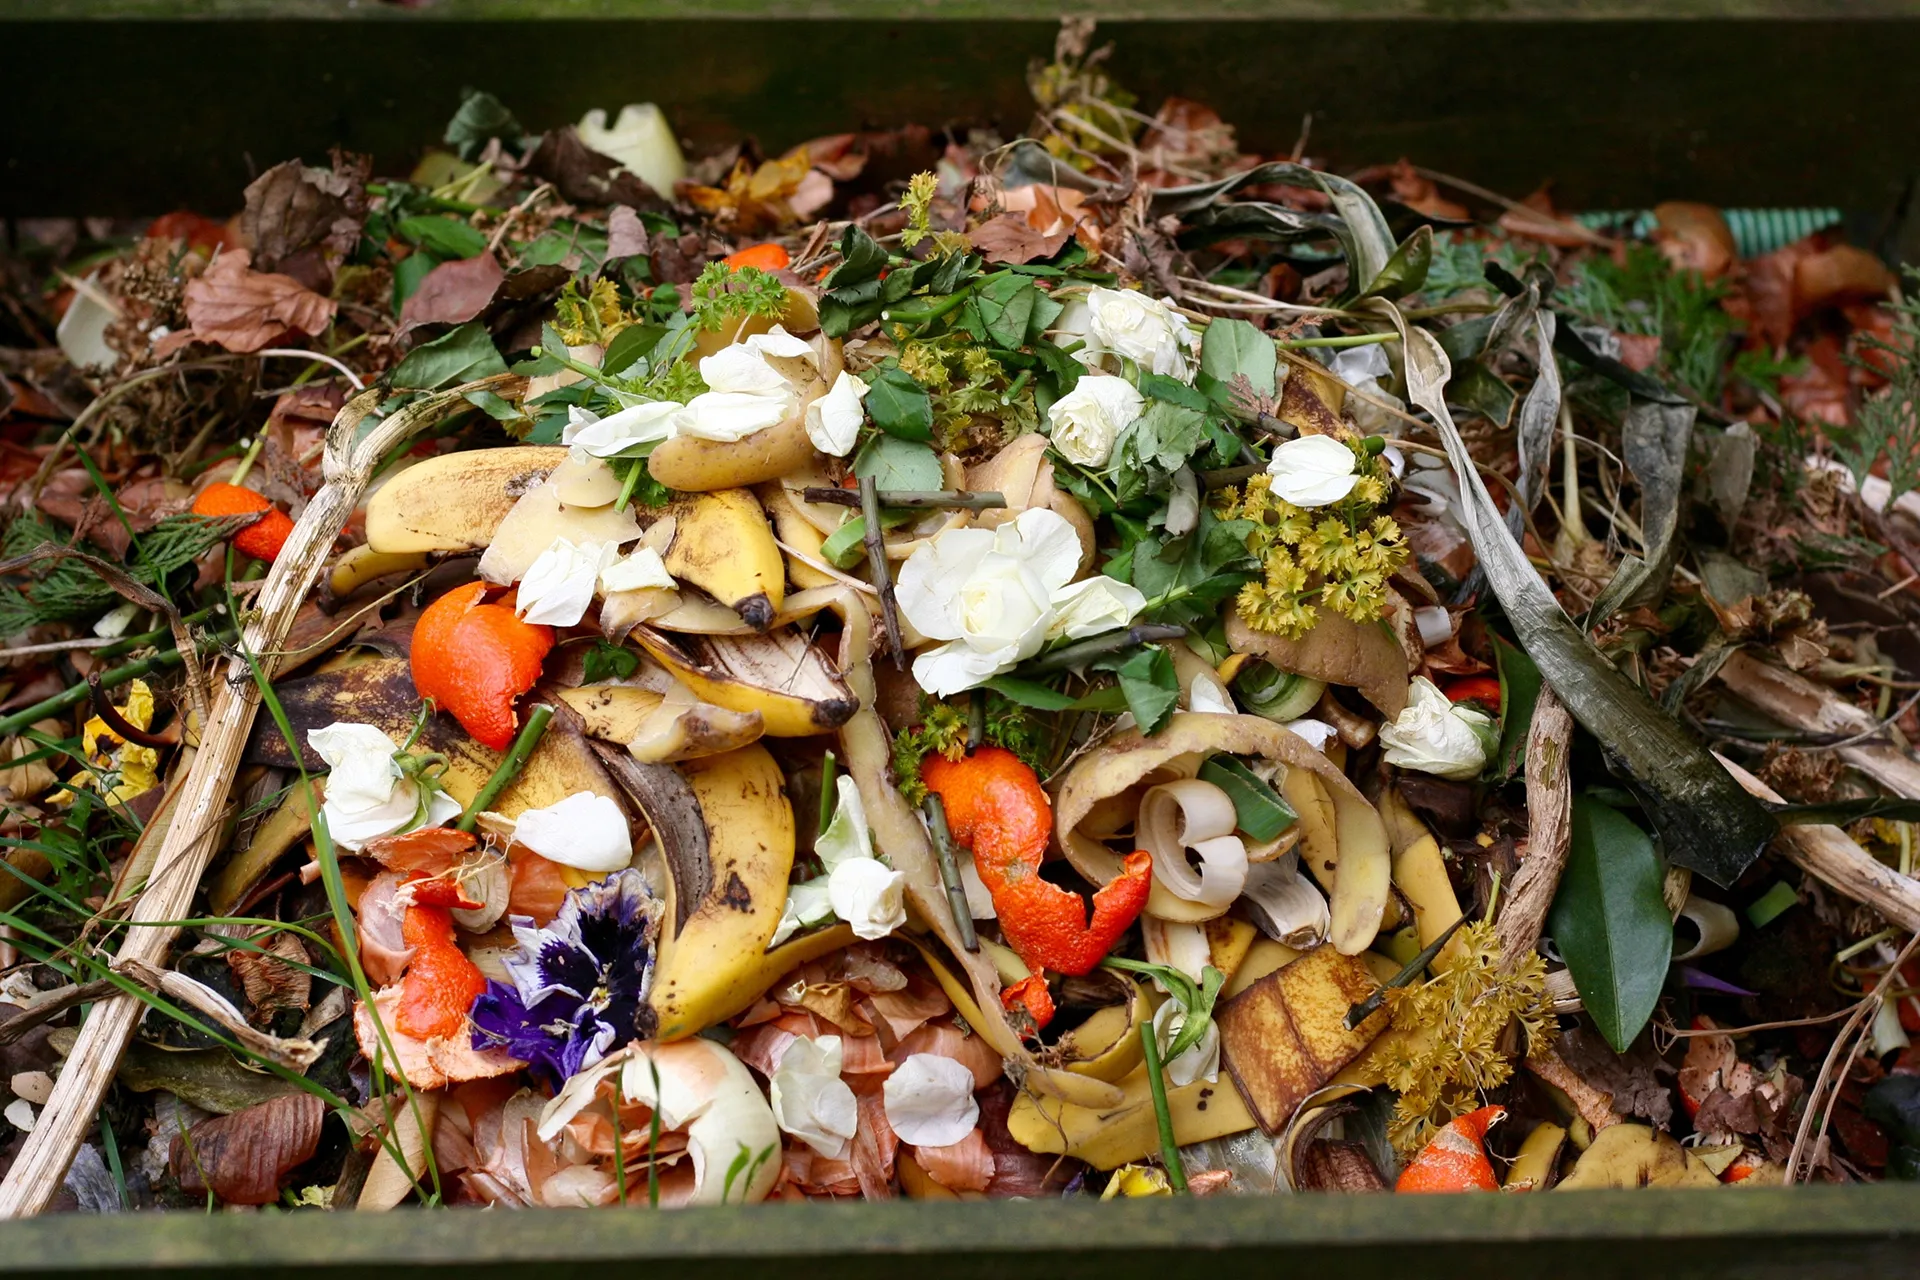 food waste management & recycling collections